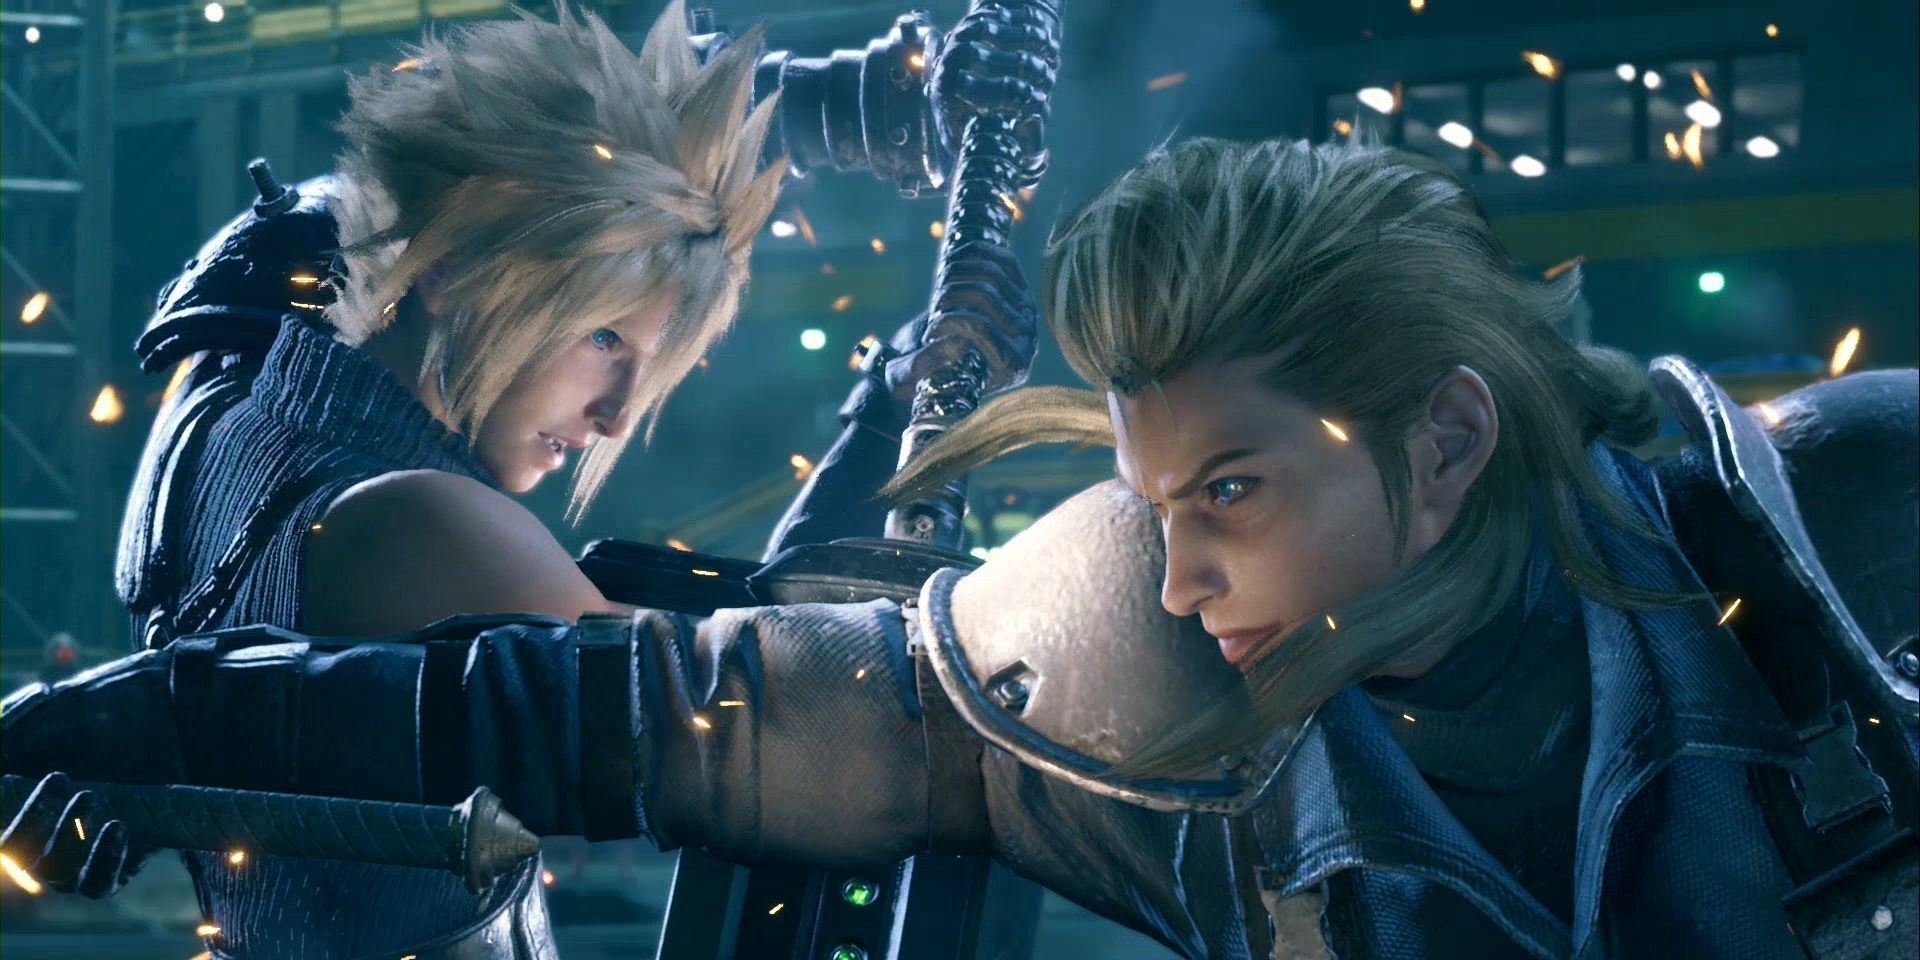 Cloud and Roche in Final Fantasy 7 Remake